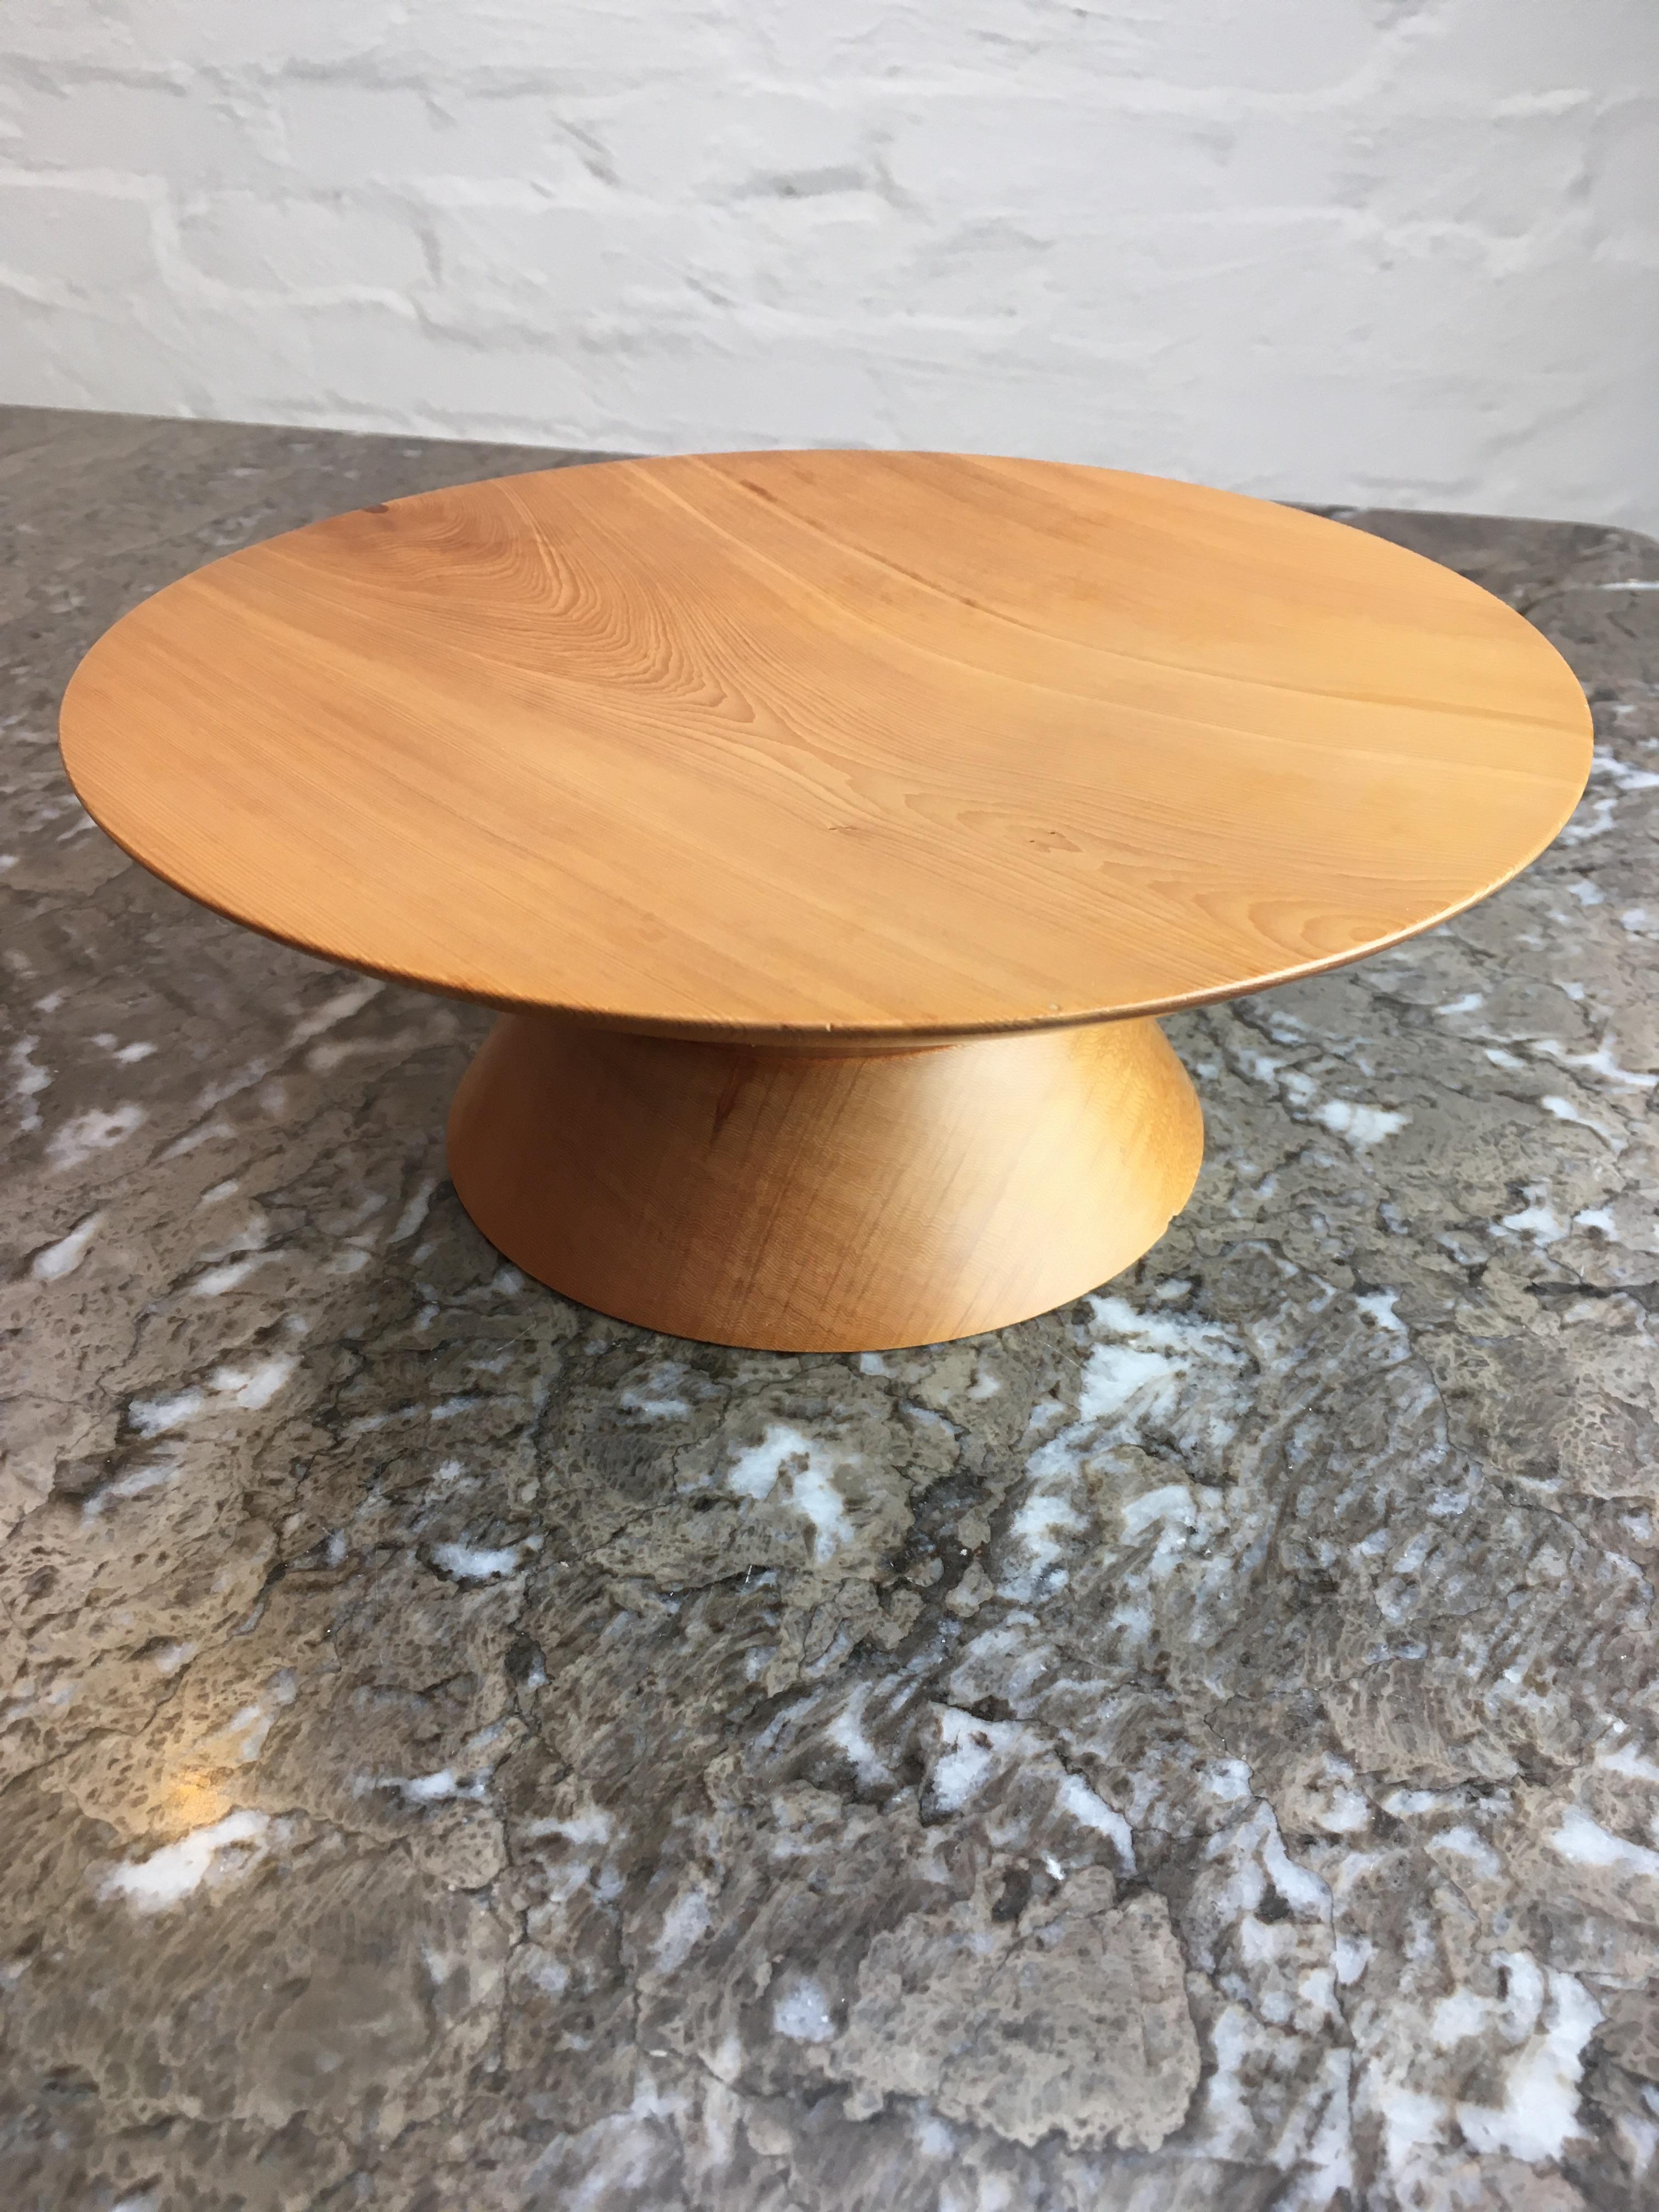 This stand has been hand turned from fine-grained Kauri Pine. It has an attractive pale straw colour and exquisite grain. 

This comport or stand can be used to offer fruit, sushi or non-edible objects. It enhances the appeal of just about